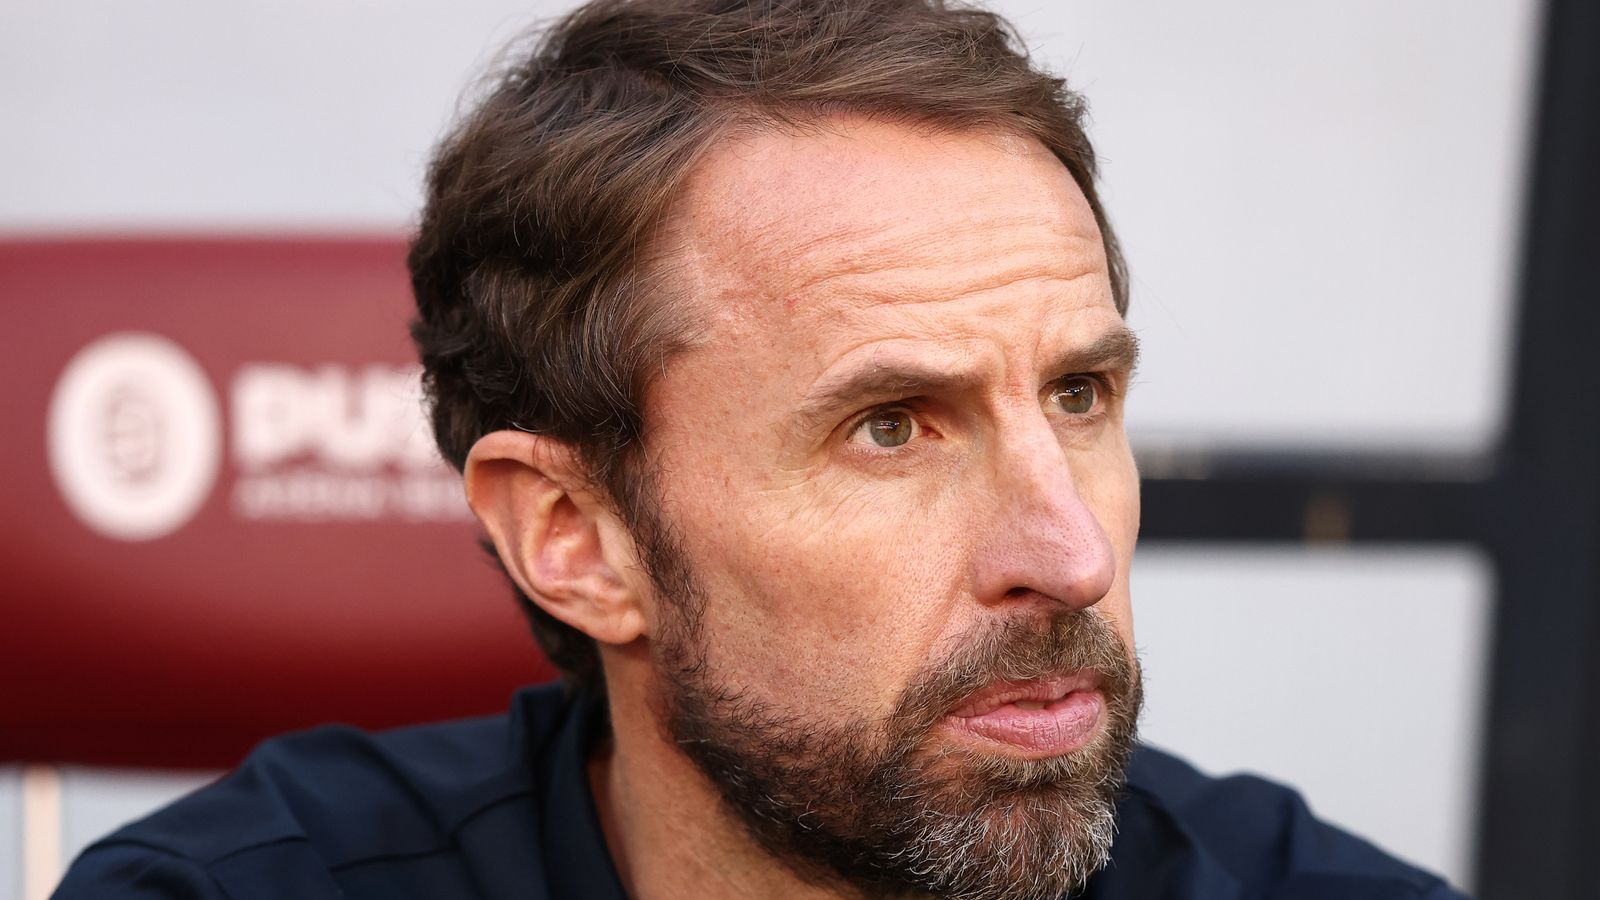 world-cup-2022-england-manager-gareth-southgate-has-questions-over-squad-with-tournament-on-horizon